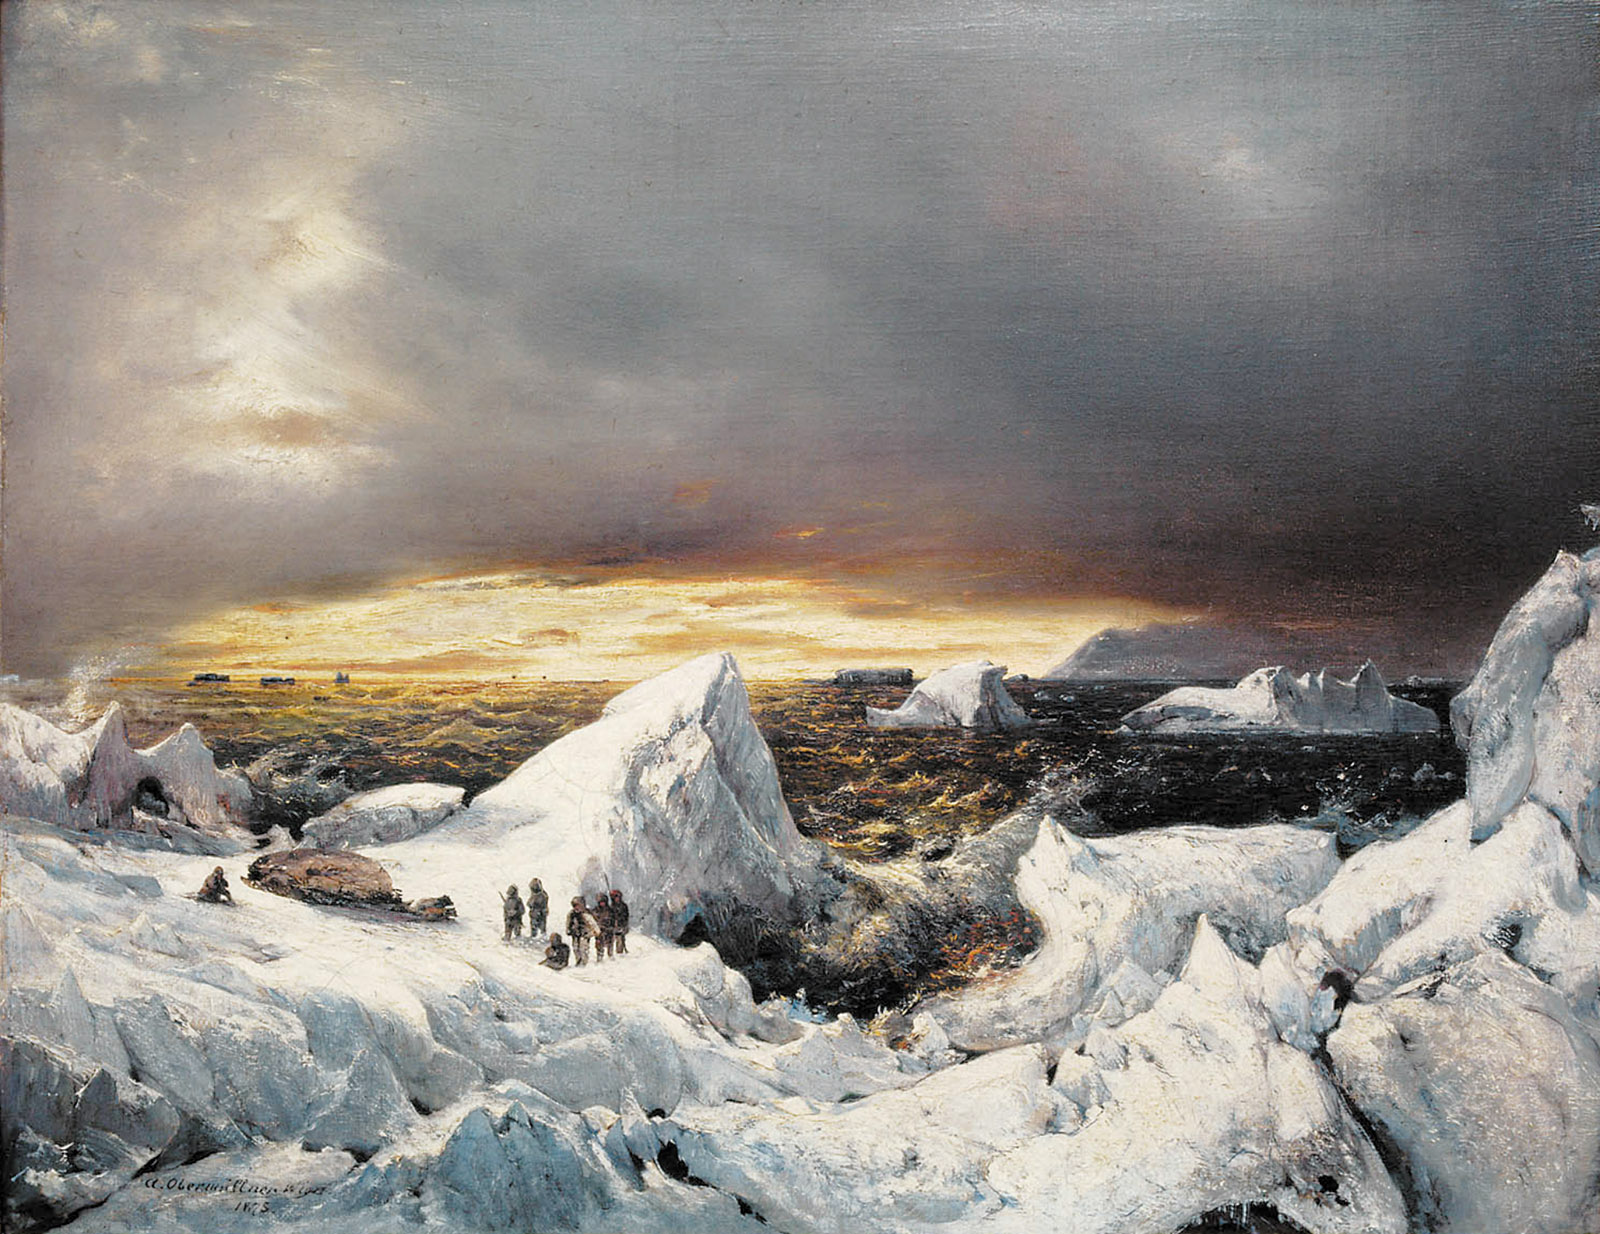 The Austro-­Hungarian expedition to the North Pole, led by Julius von Payer and Karl Weyprecht, 1872–1874; painting by Adolf Obermueller, 1892